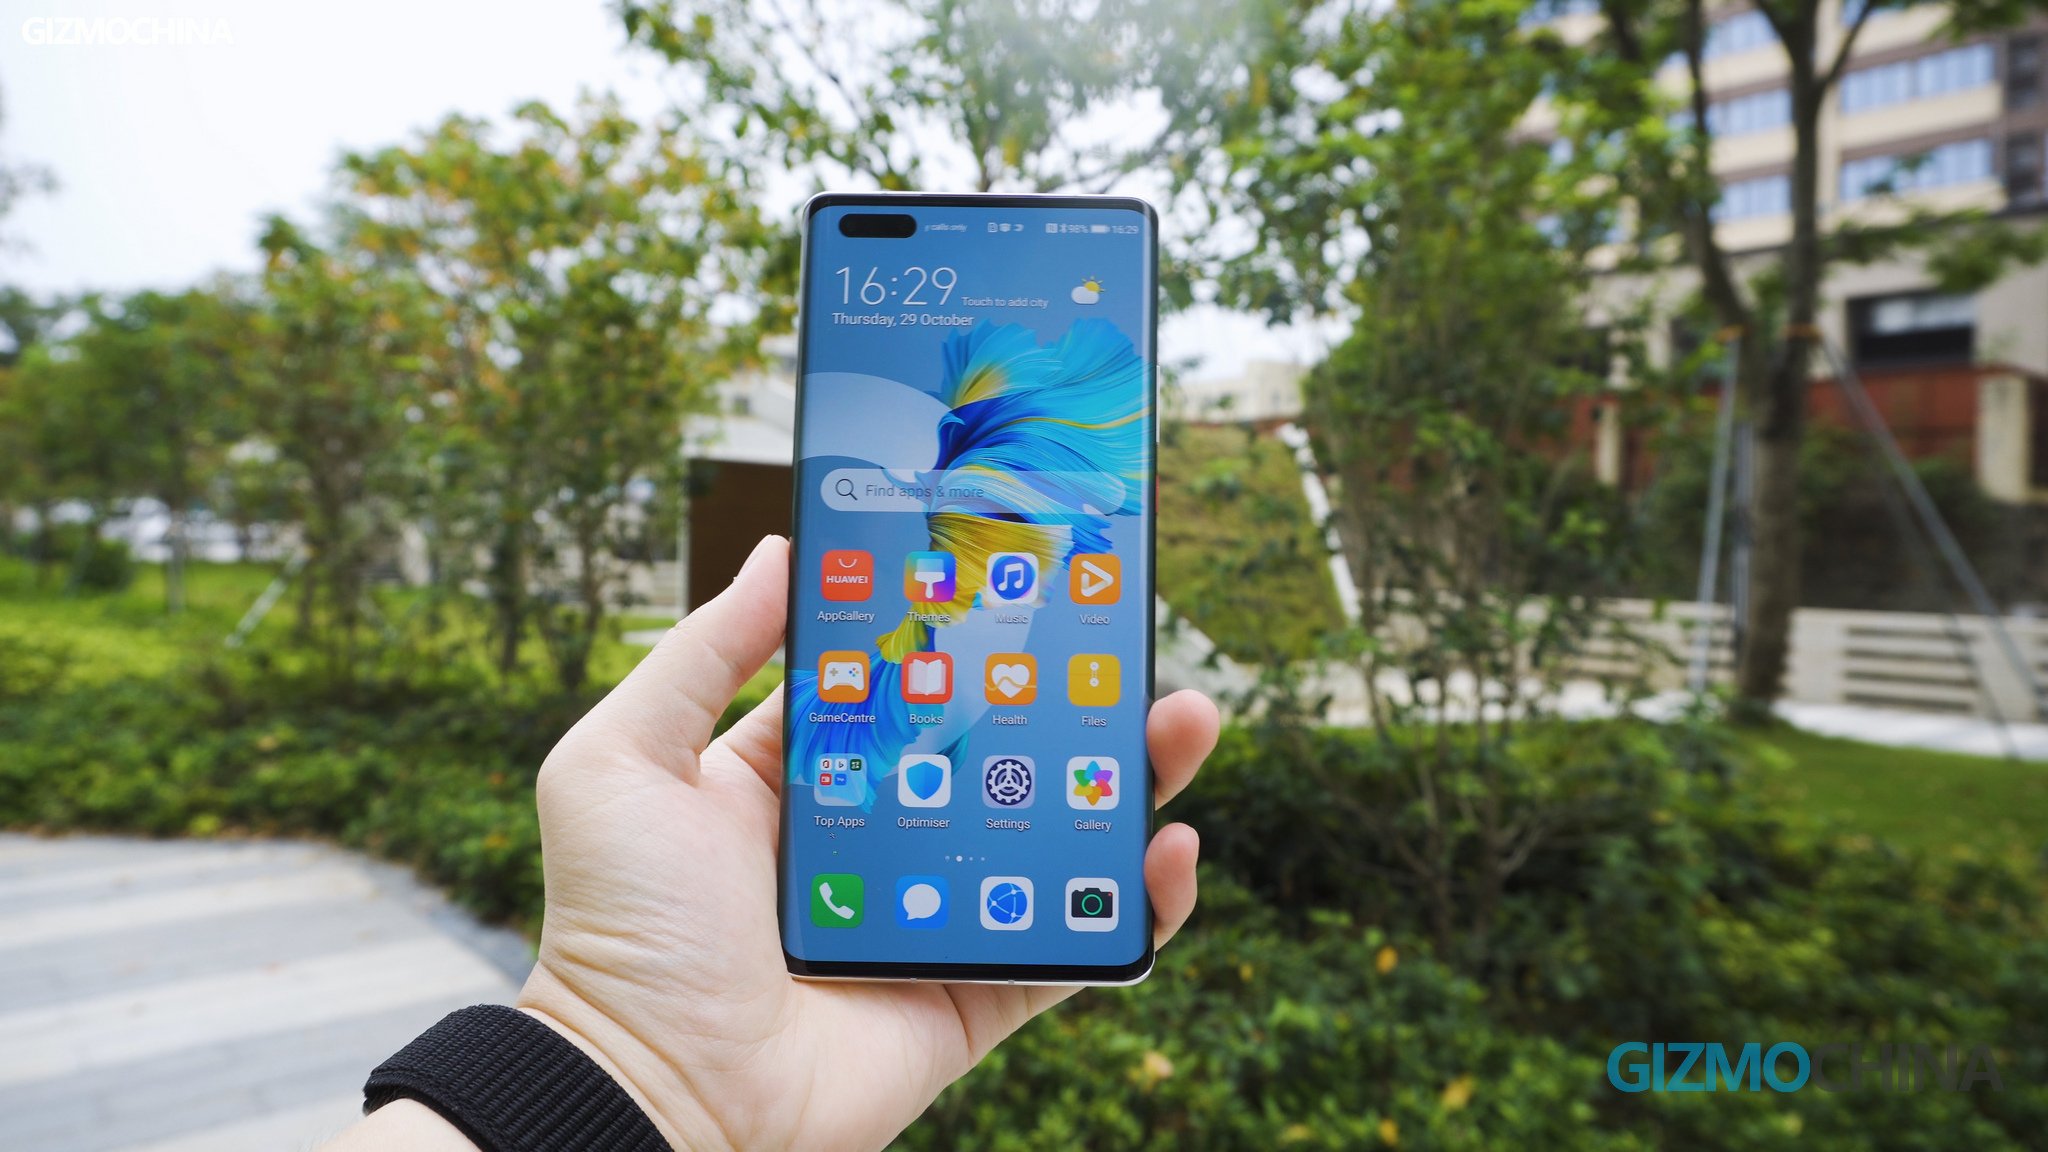 Huawei Mate 40 series took 3 years to develop, reveals CEO Richard Yu